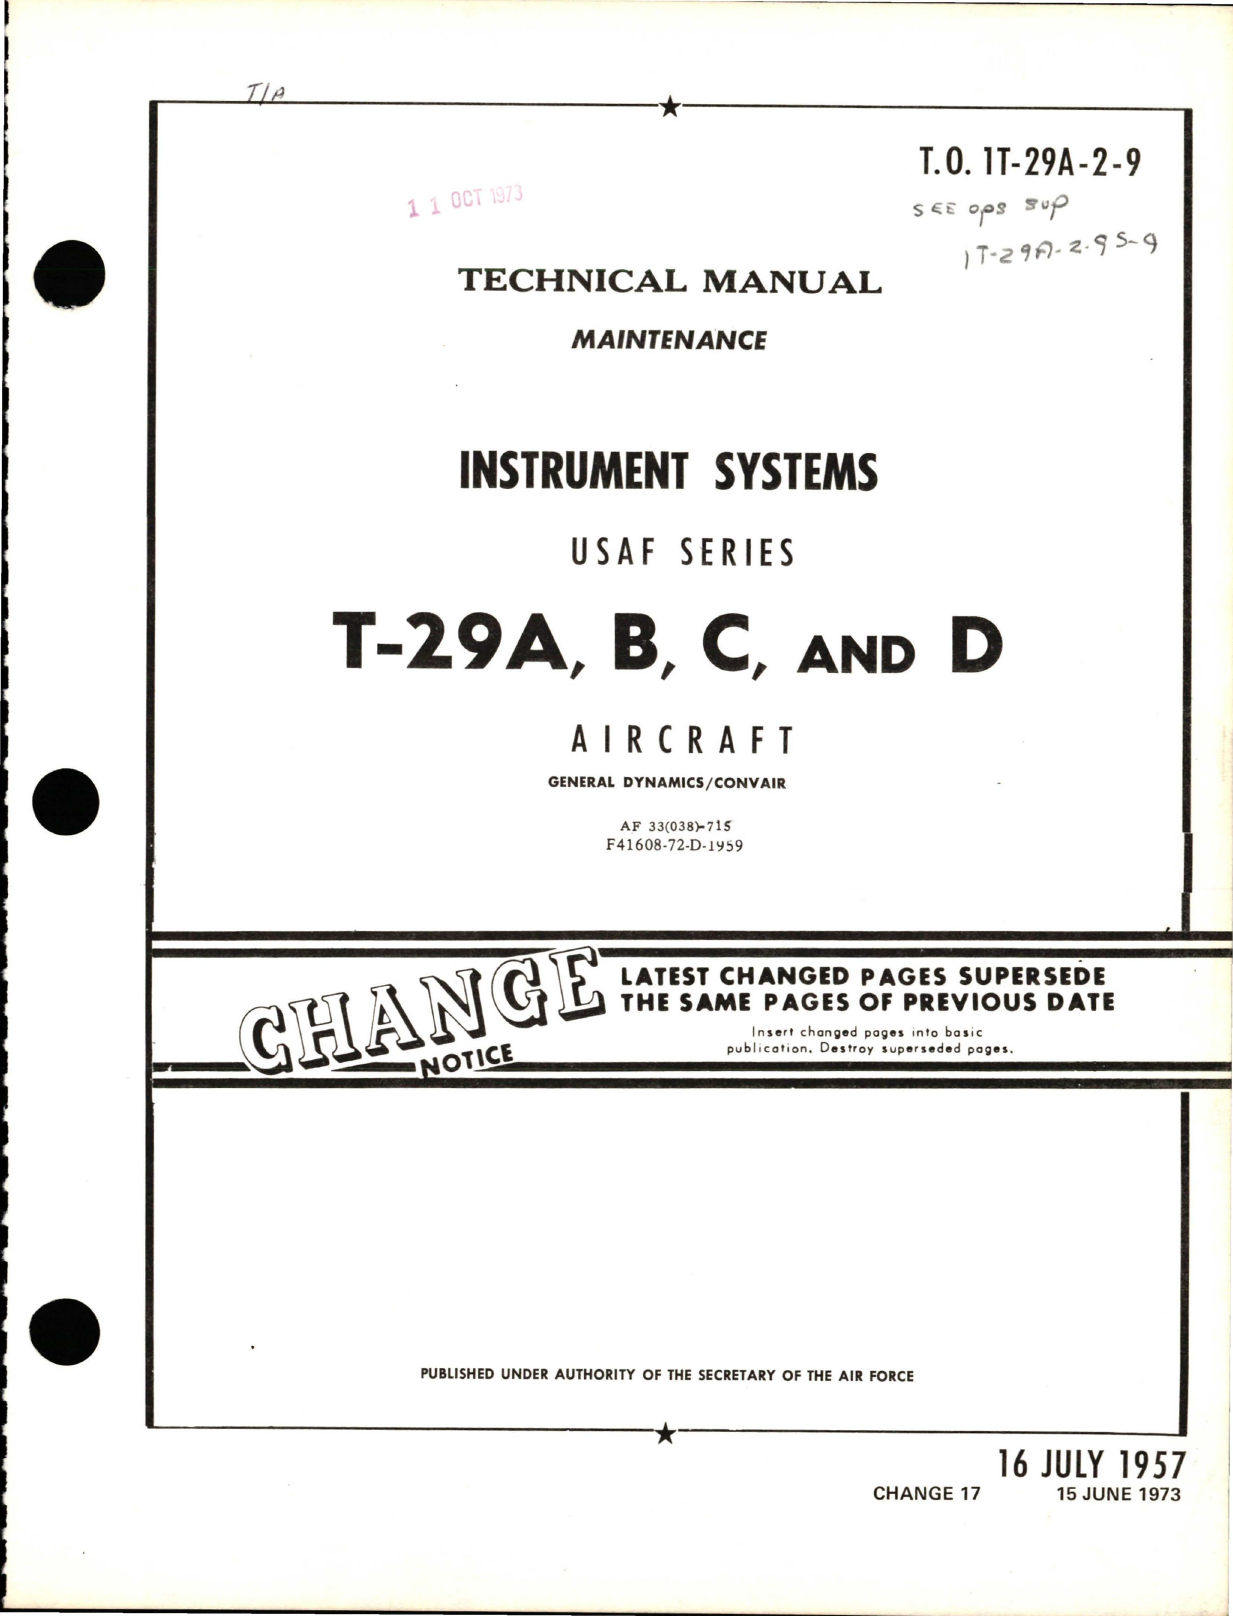 Sample page 1 from AirCorps Library document: Maintenance for Instrument Systems - T-29A, T-29B, T-29C and T-29D